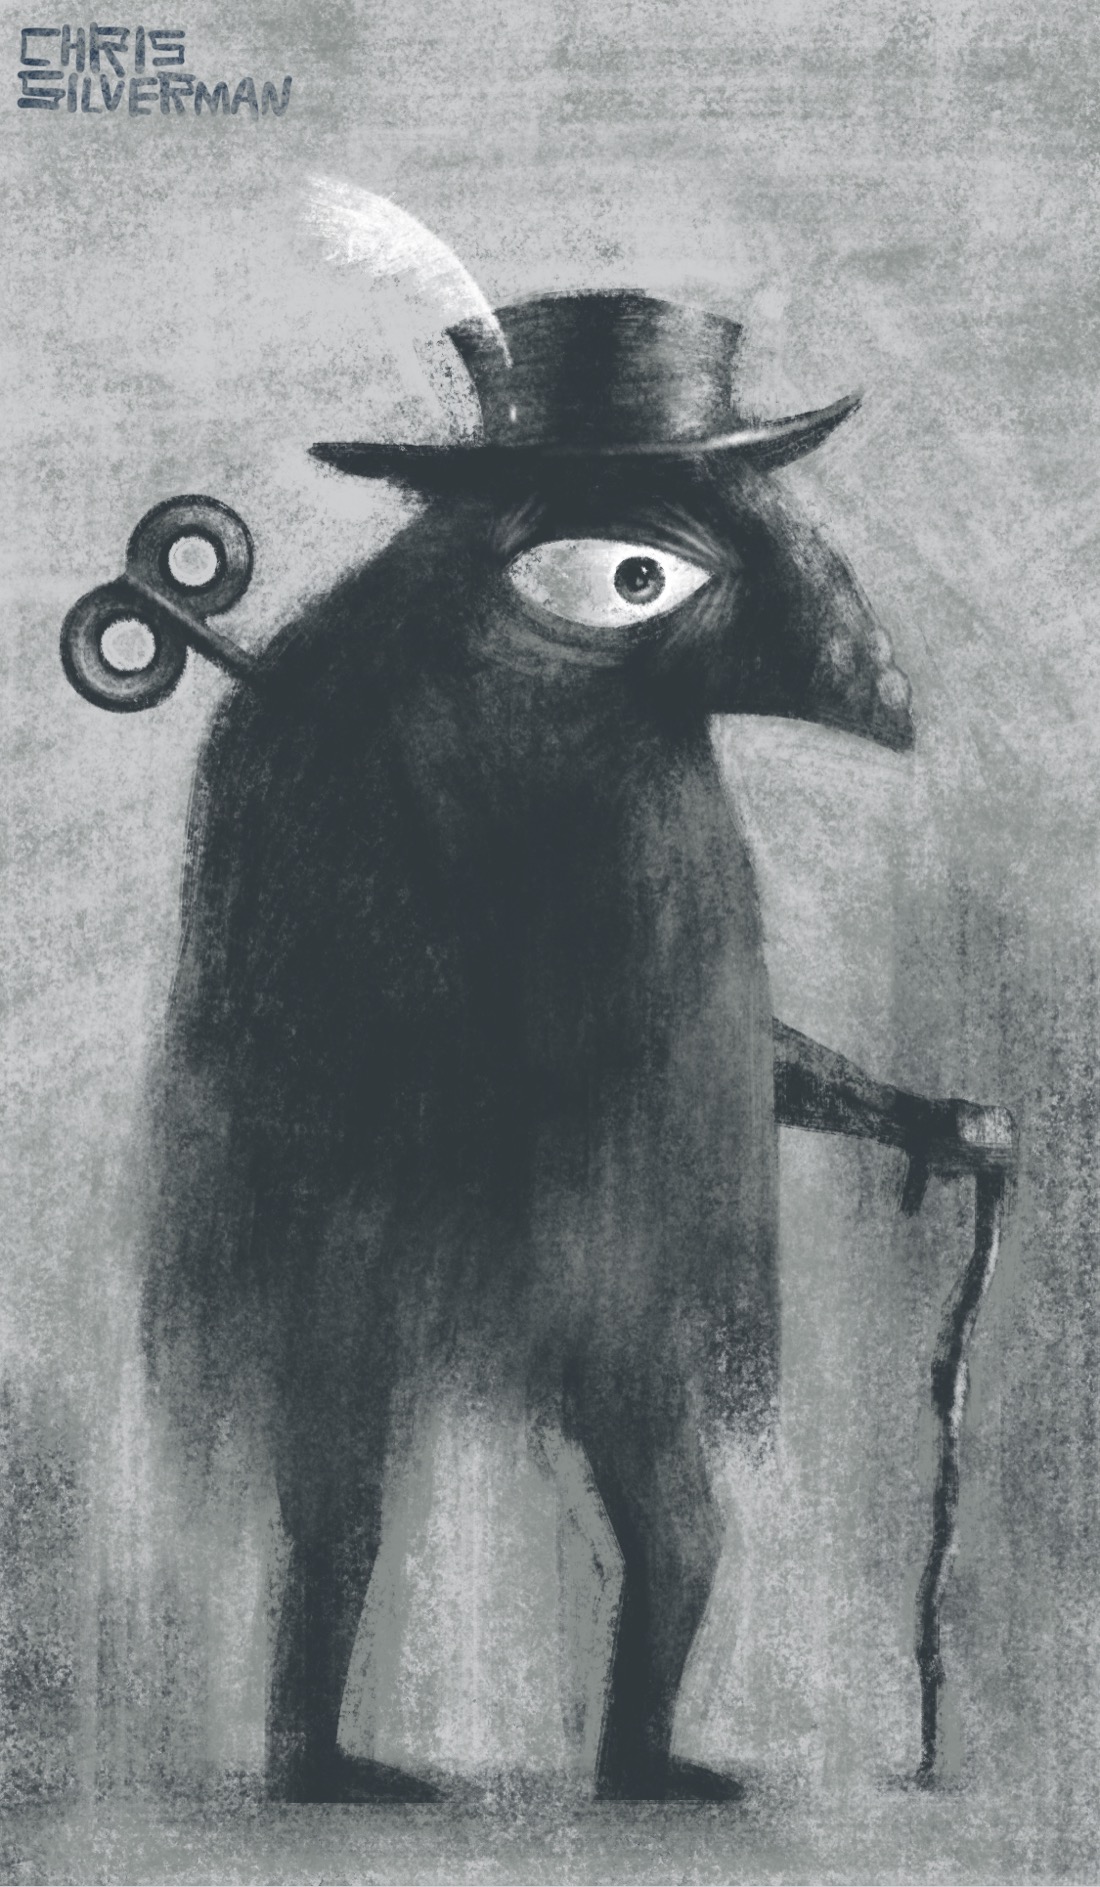 A bizarre creature with a sharp beak like a bird and a large eye that looks human. The creature stands on two legs and is holding a cane or walking stick. It is wearing a hat with a brim and a white feather, and has a windup key sticking out of its back. This is a black and white charcoal drawing.